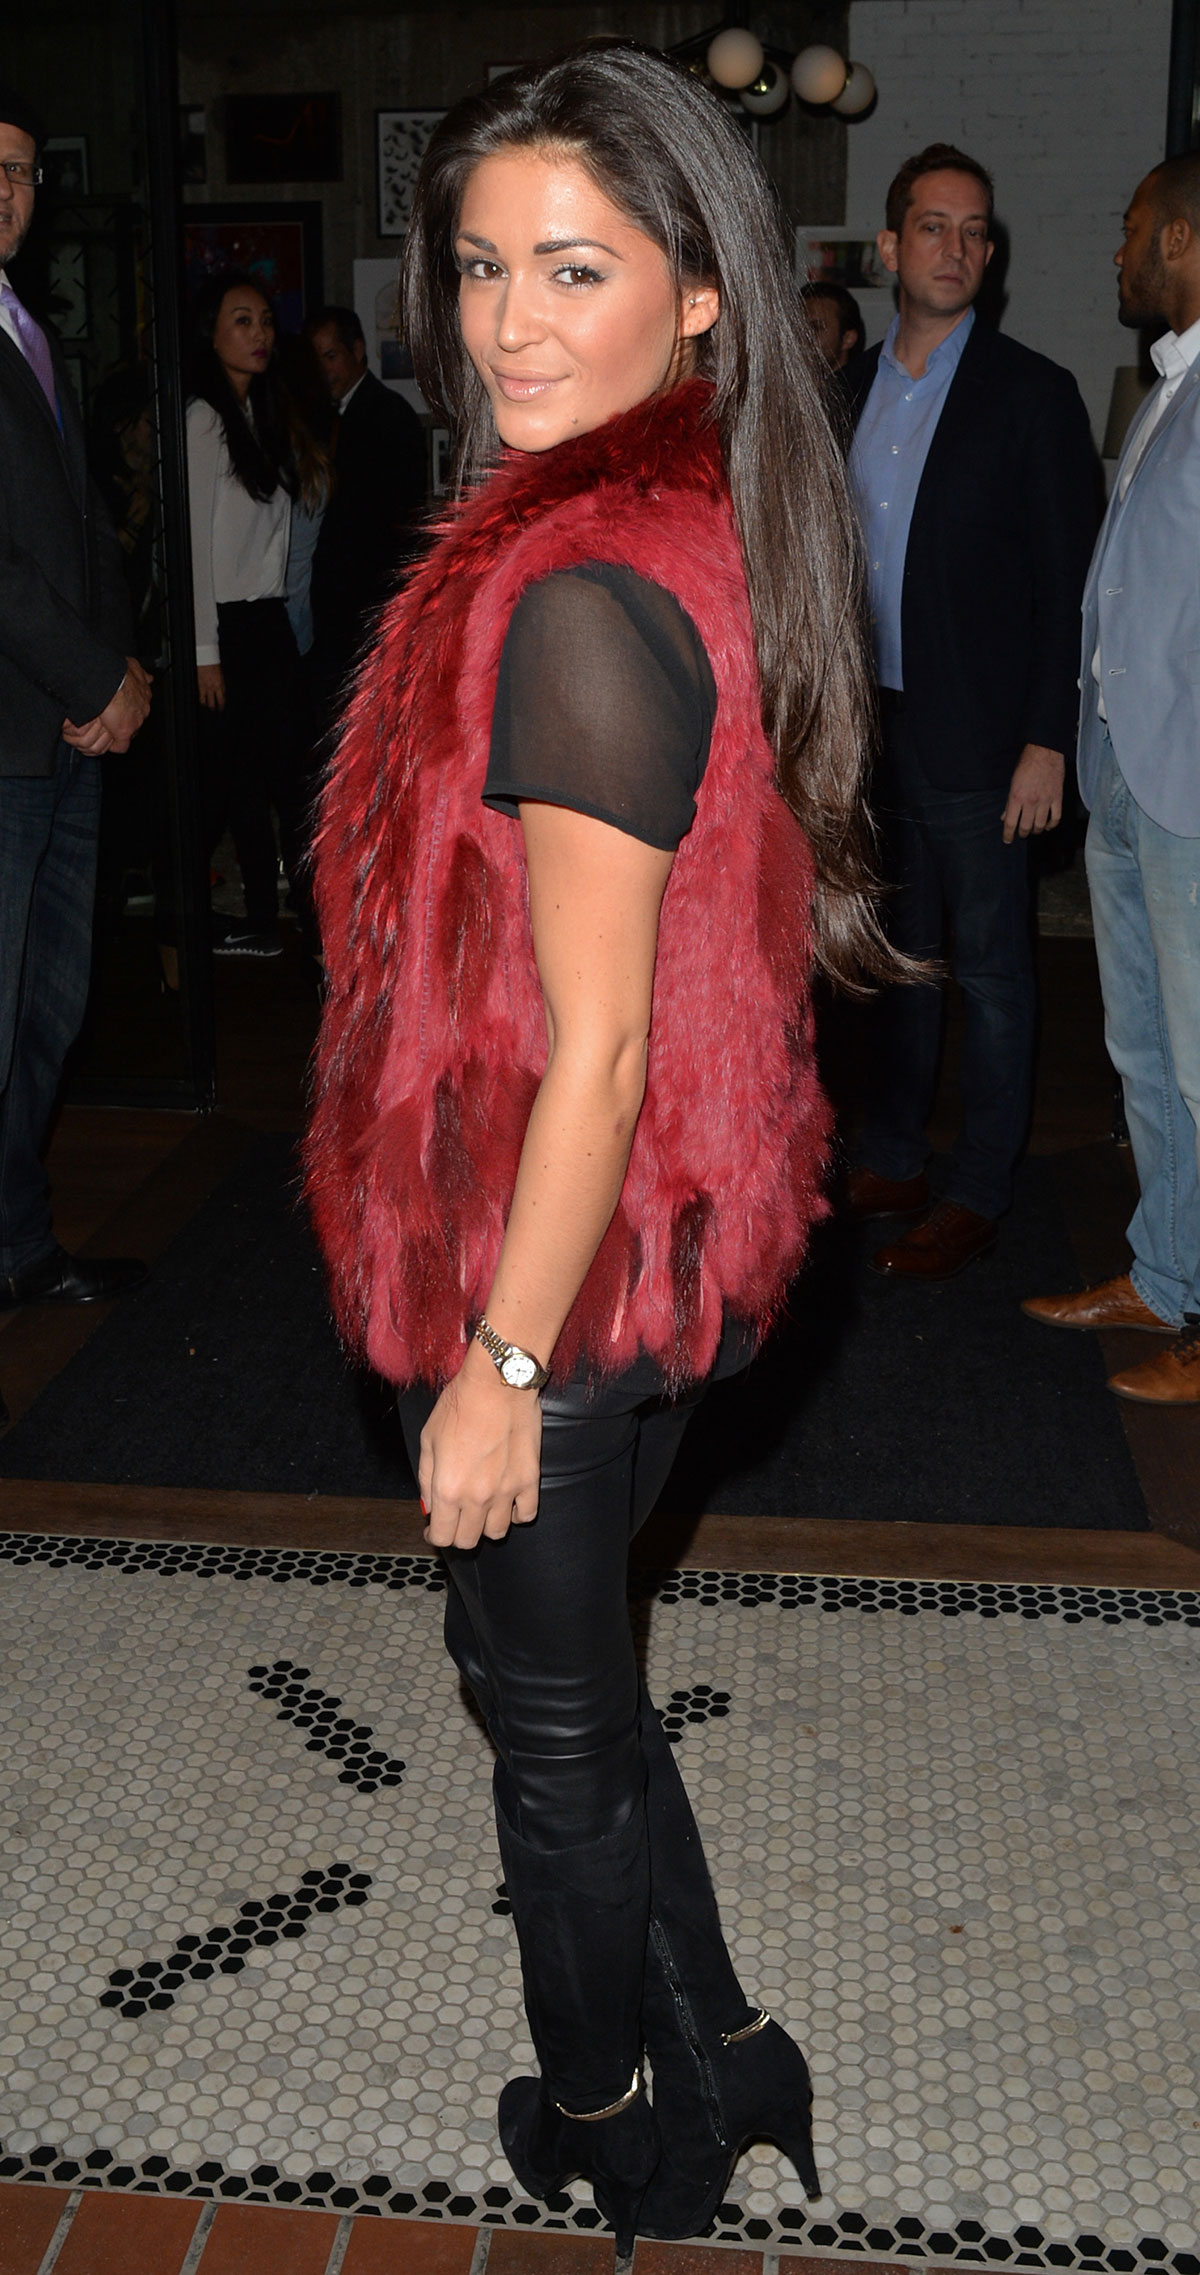 Casey Batchelor attends Hoxton Holborn hotel opening party